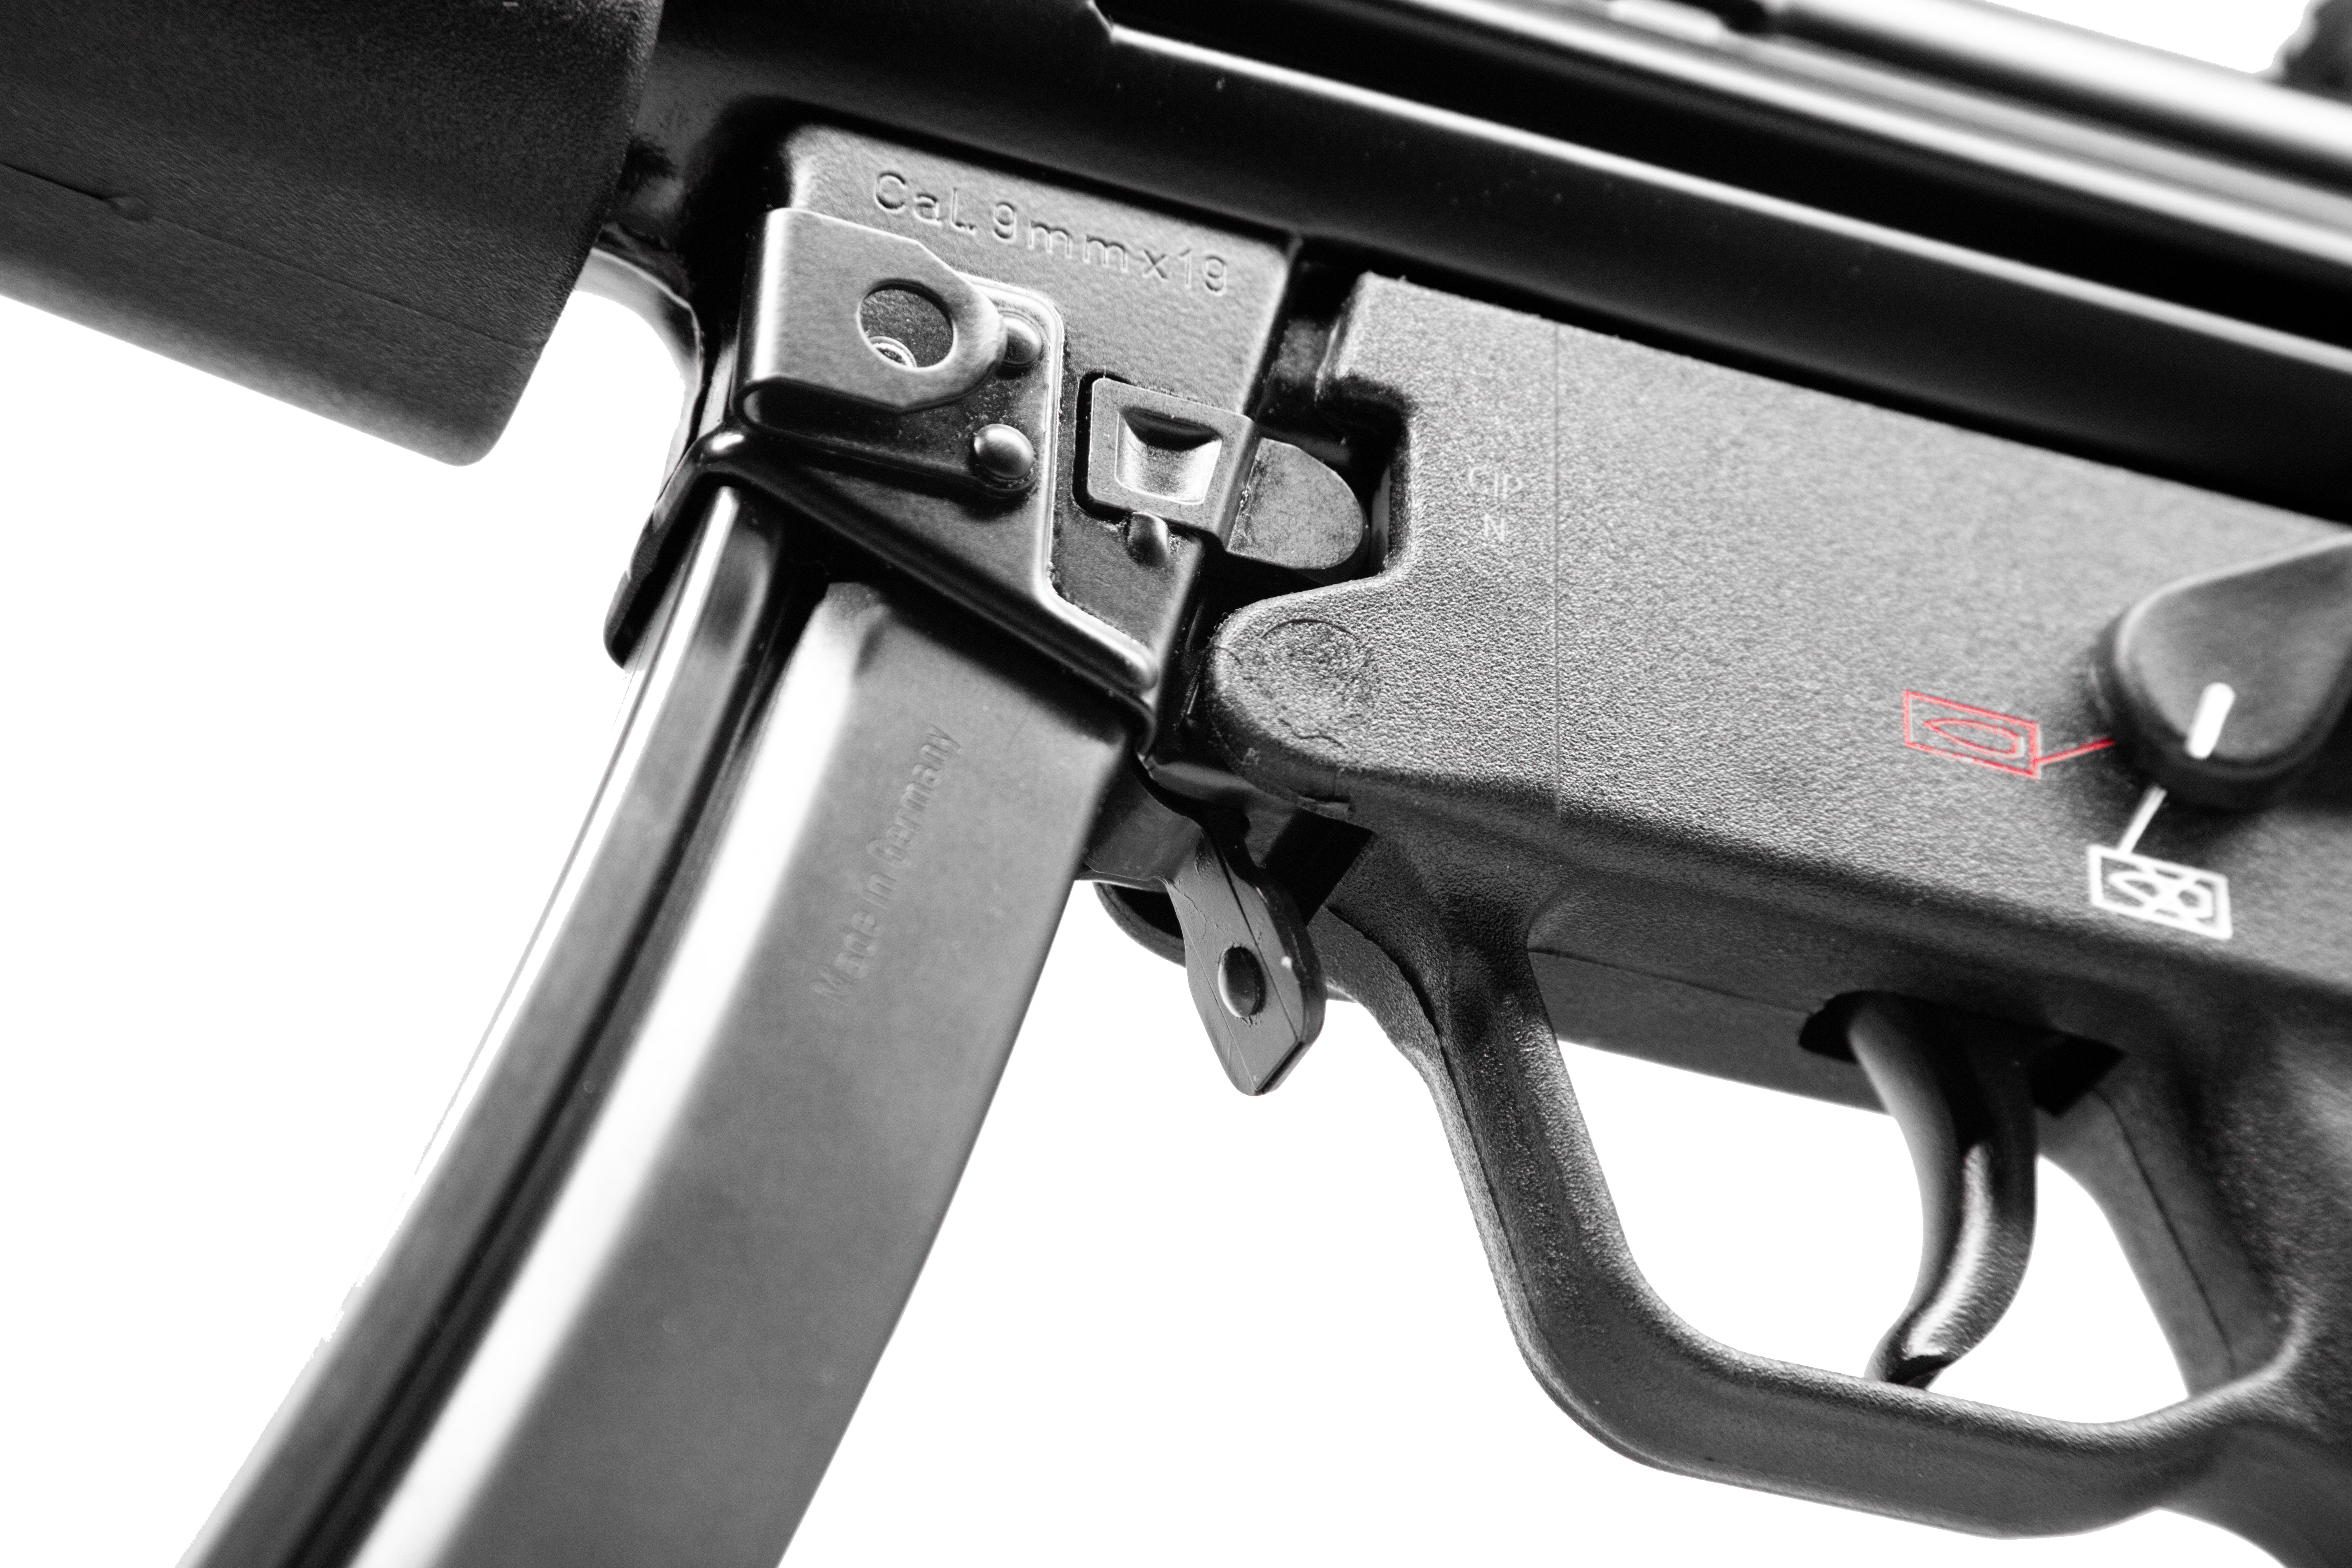 The SP5 uses the same paddle magazine as the MP5.